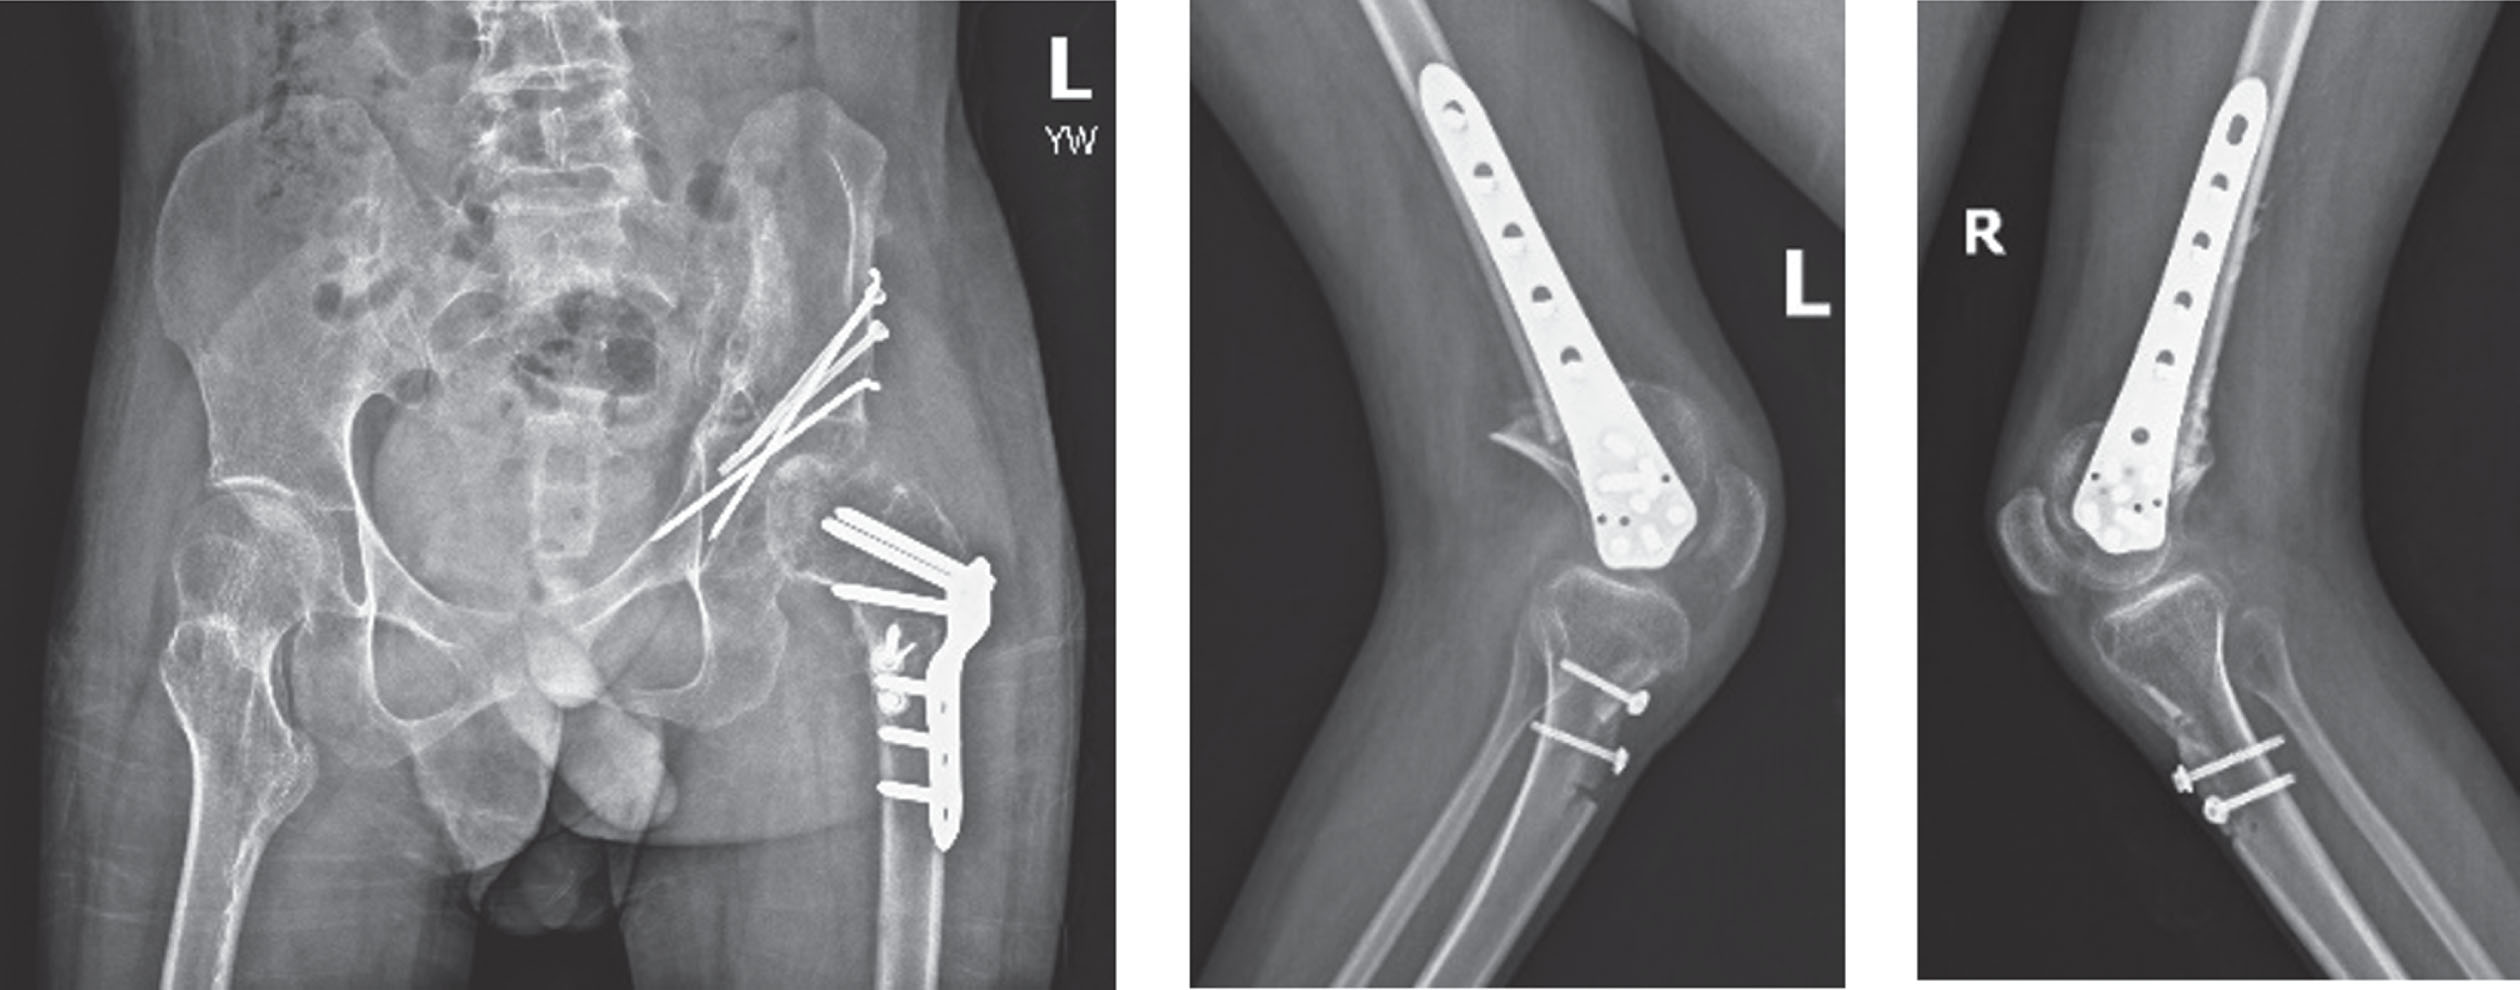 Postoperative x-rays after proximal femoral extension, varus, and rotation osteotomy, distal femur extension osteotomy, and patellar advancement.